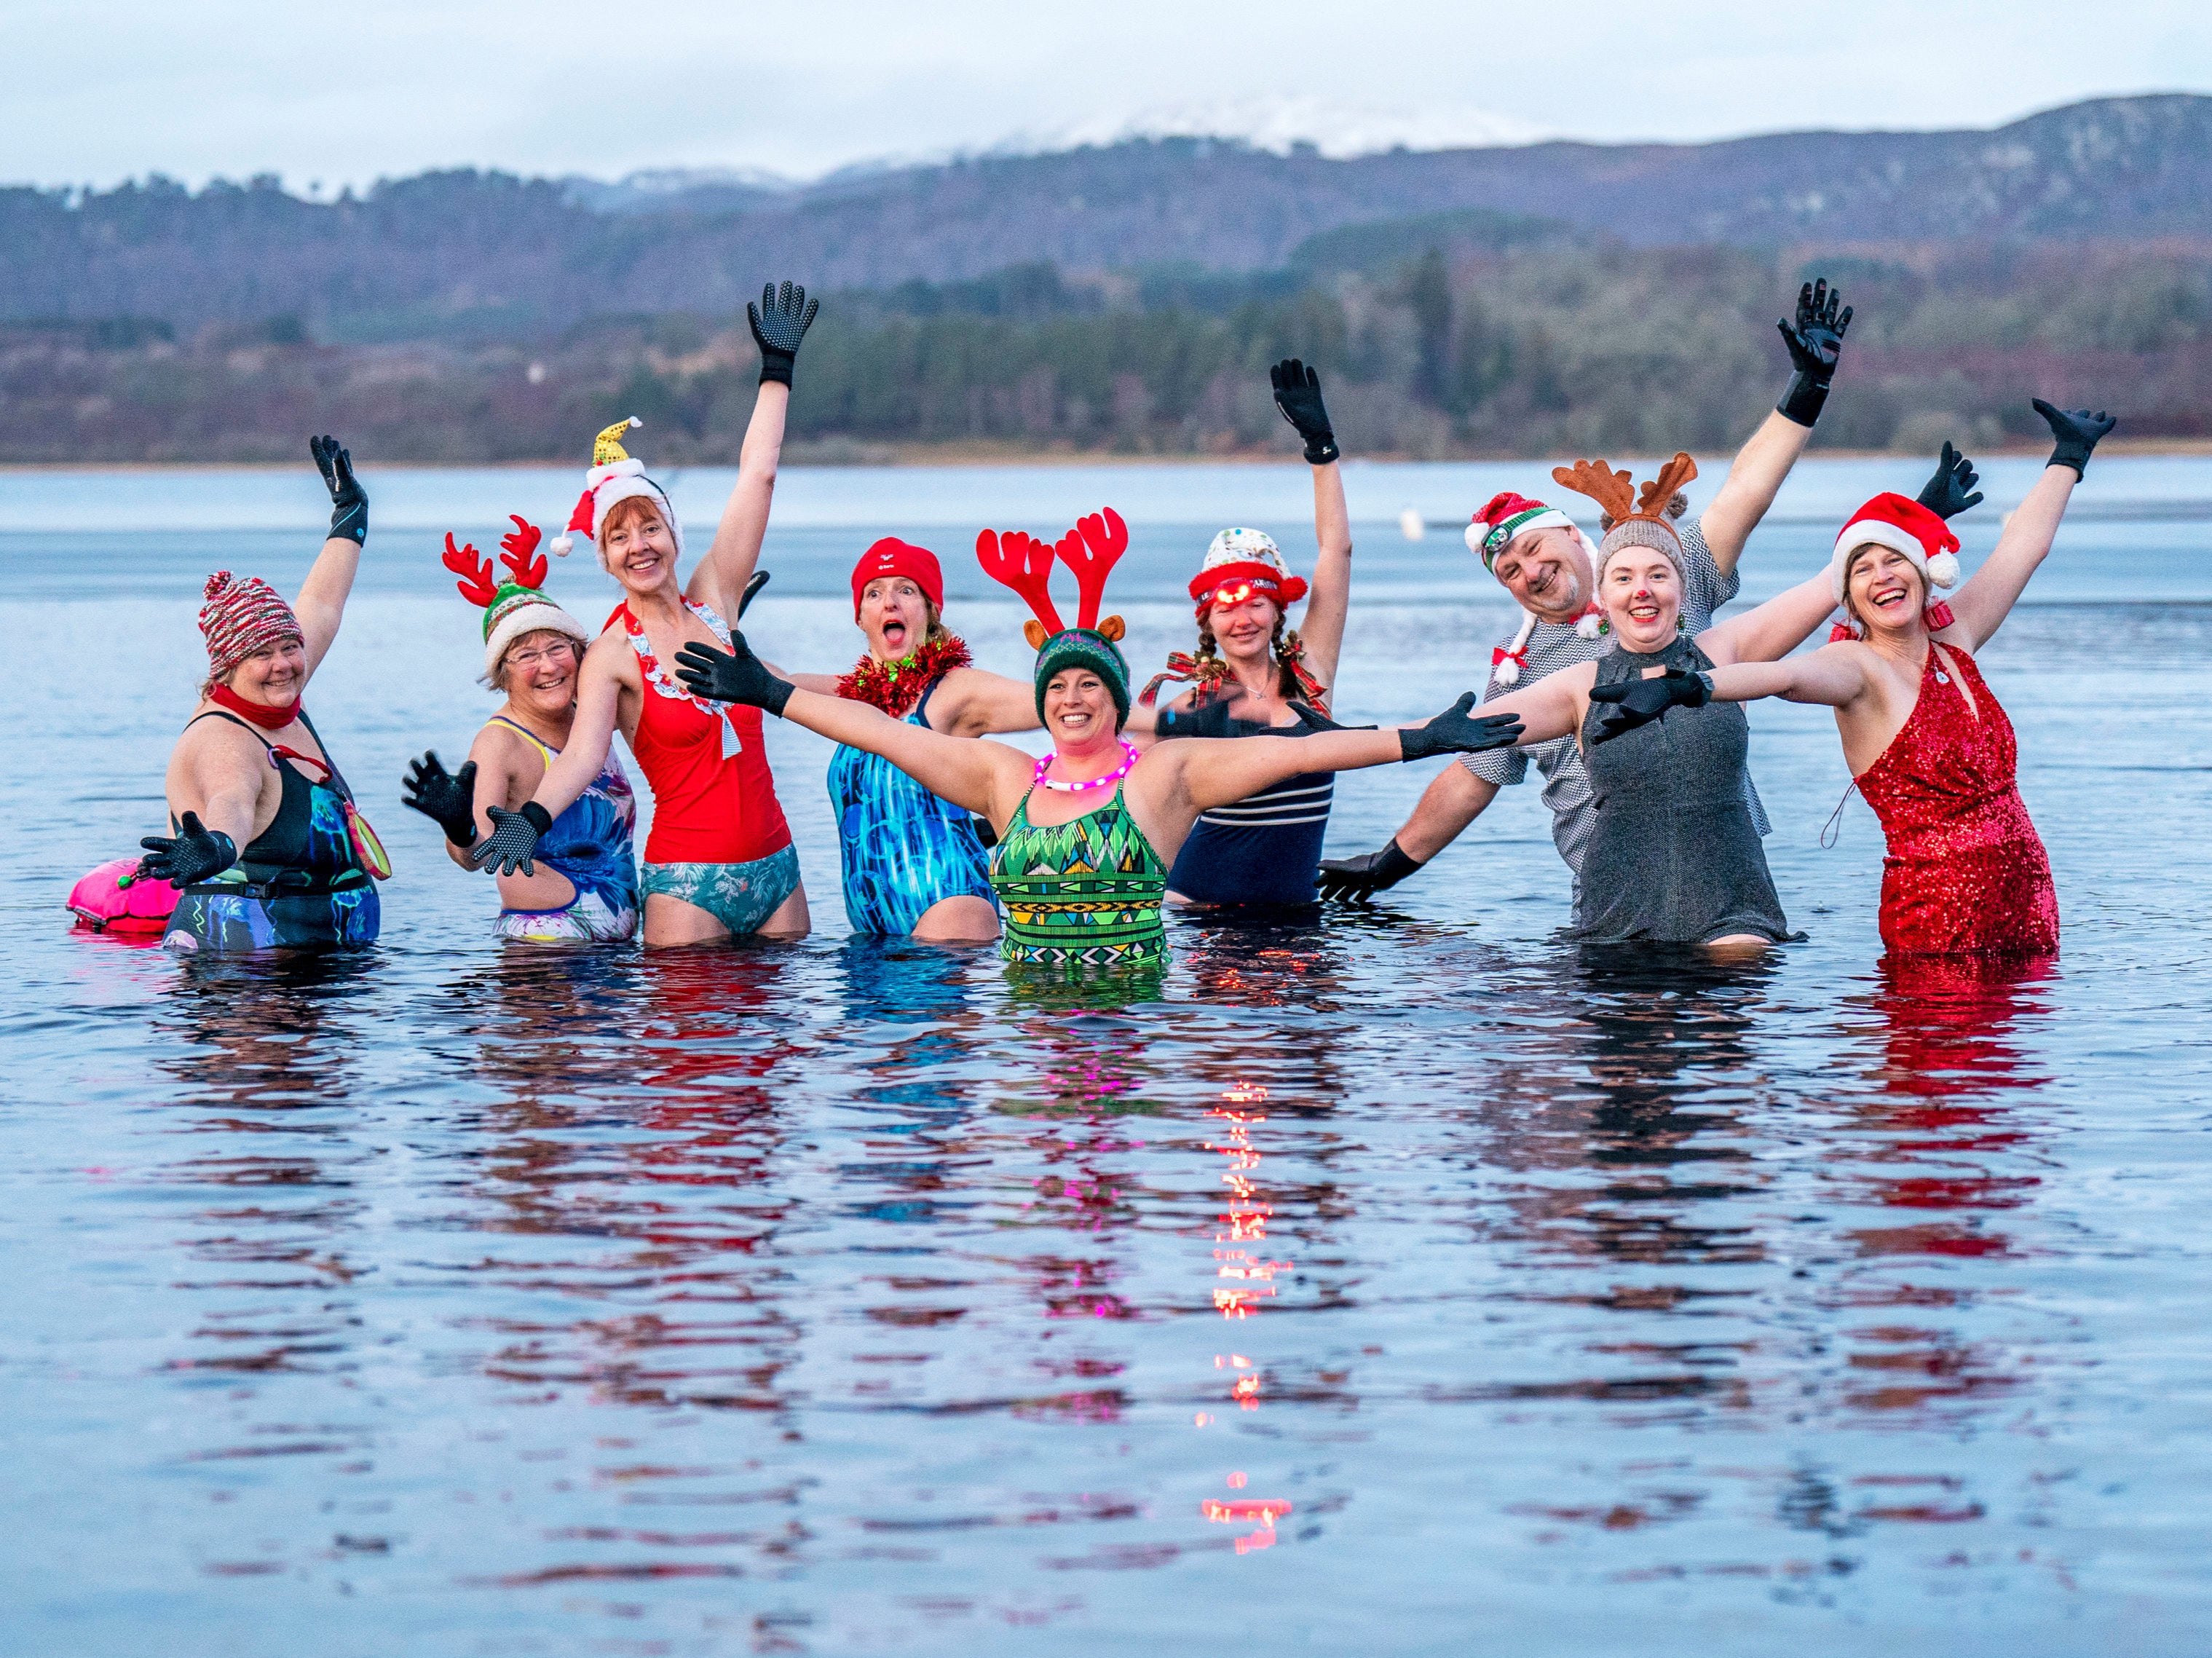 Members of the Loch Insh Dippers wild swim group take part in a Christmas-themed swim in Loch Insh in the Cairngorms National Park near Aviemore, Scotland